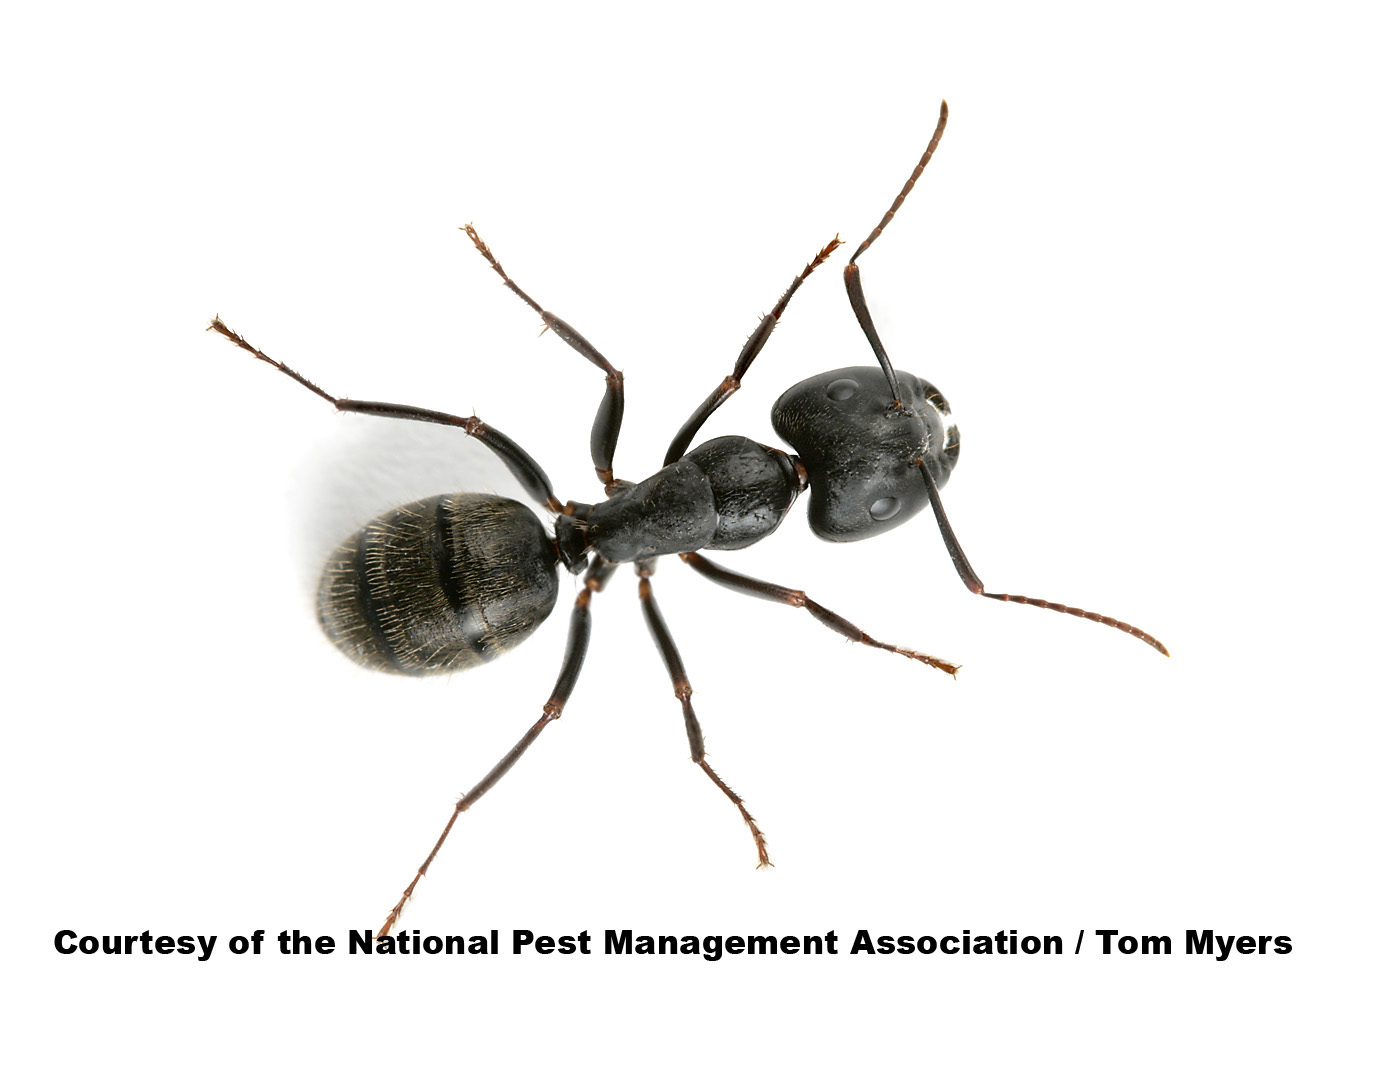 Carpenter Ant Information - Fun Ant Facts from PestWorld for Kids